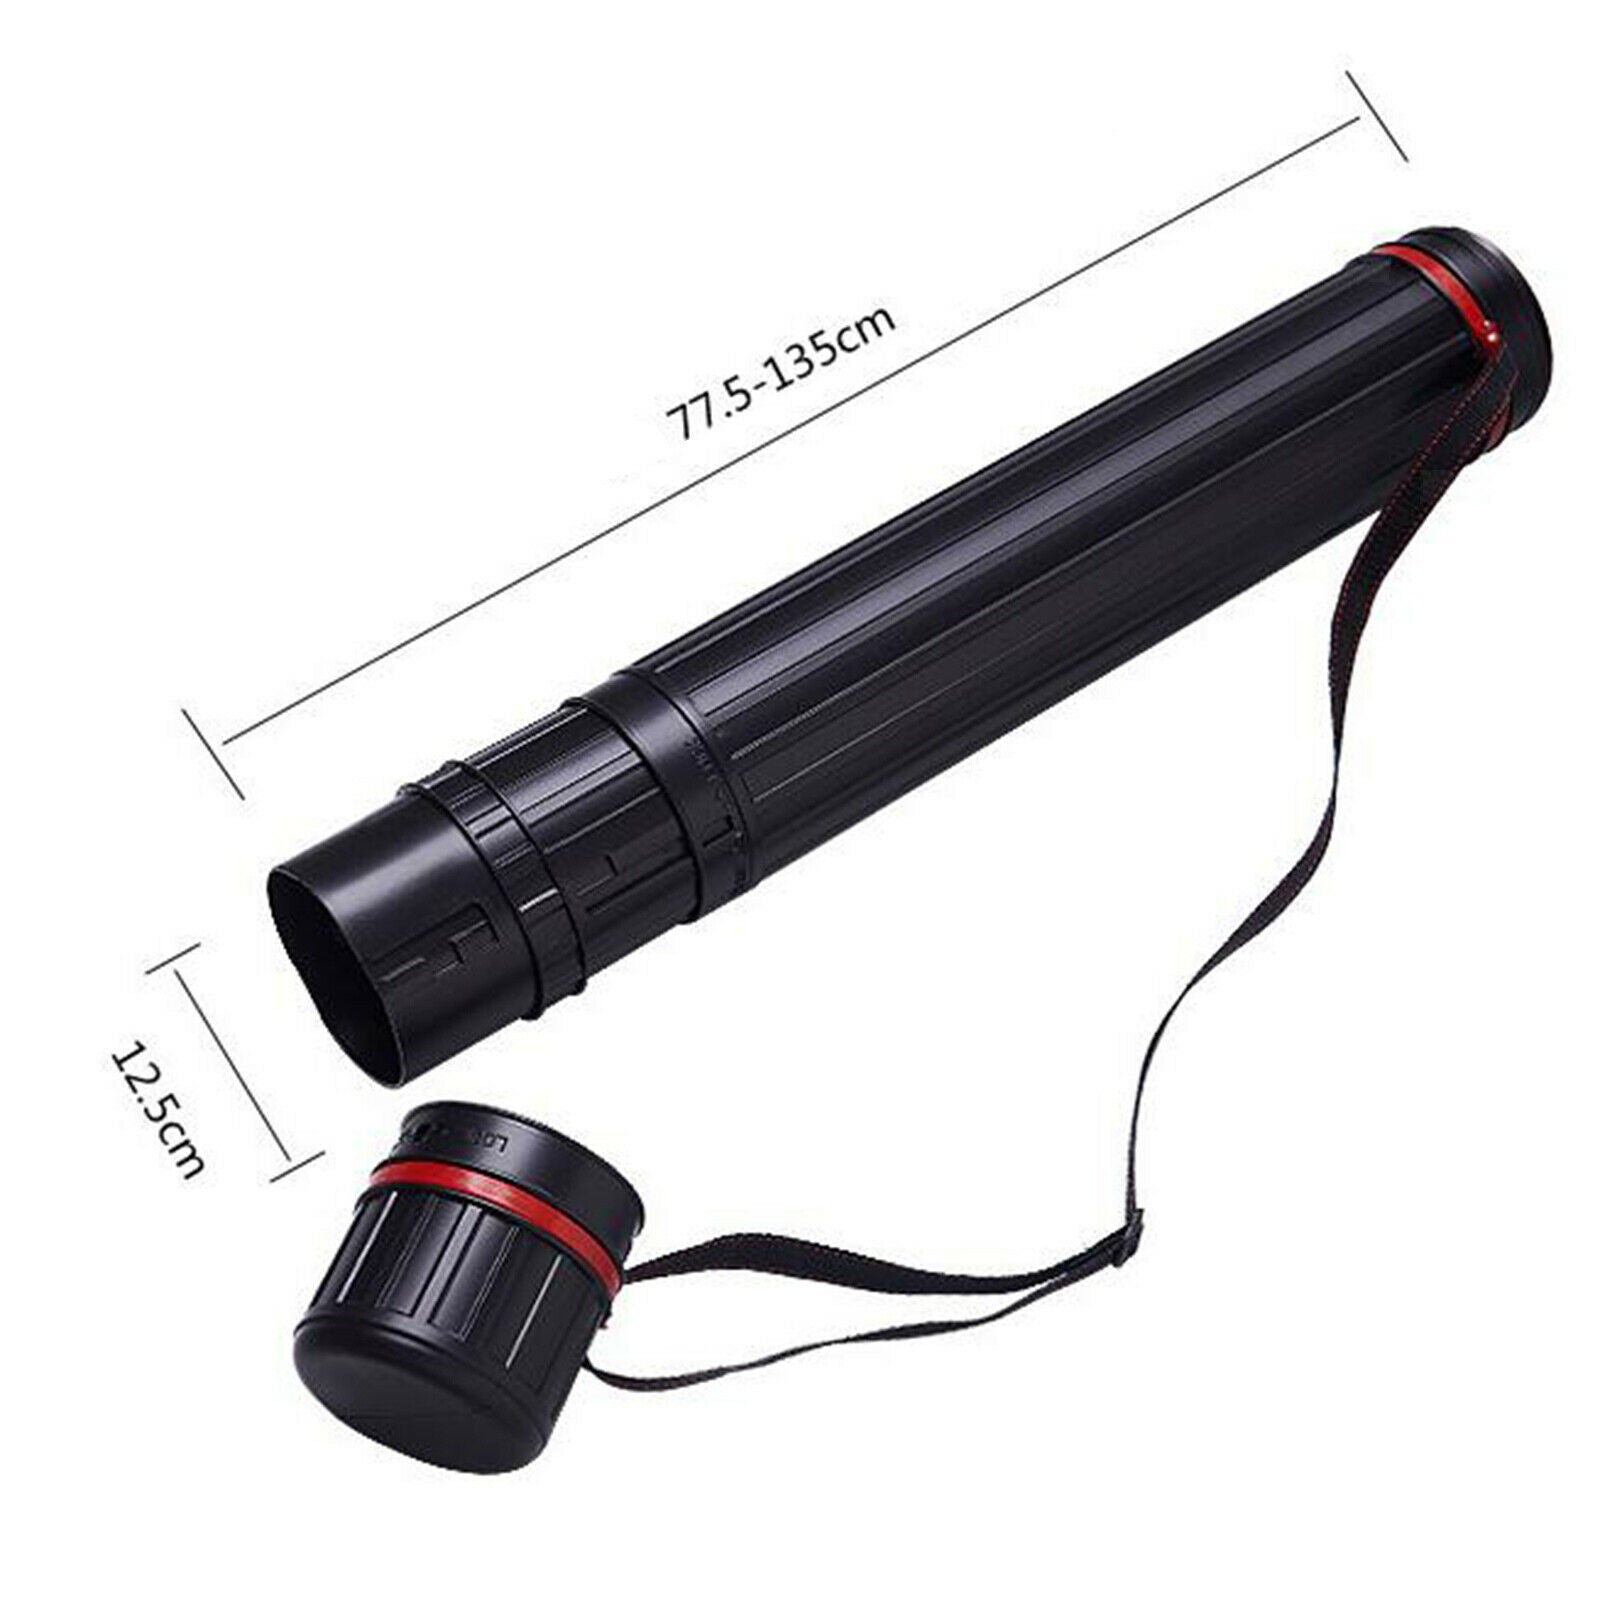 Telescopic Extendable Art Drawing Plans Storage Carry Case Tube with Strap